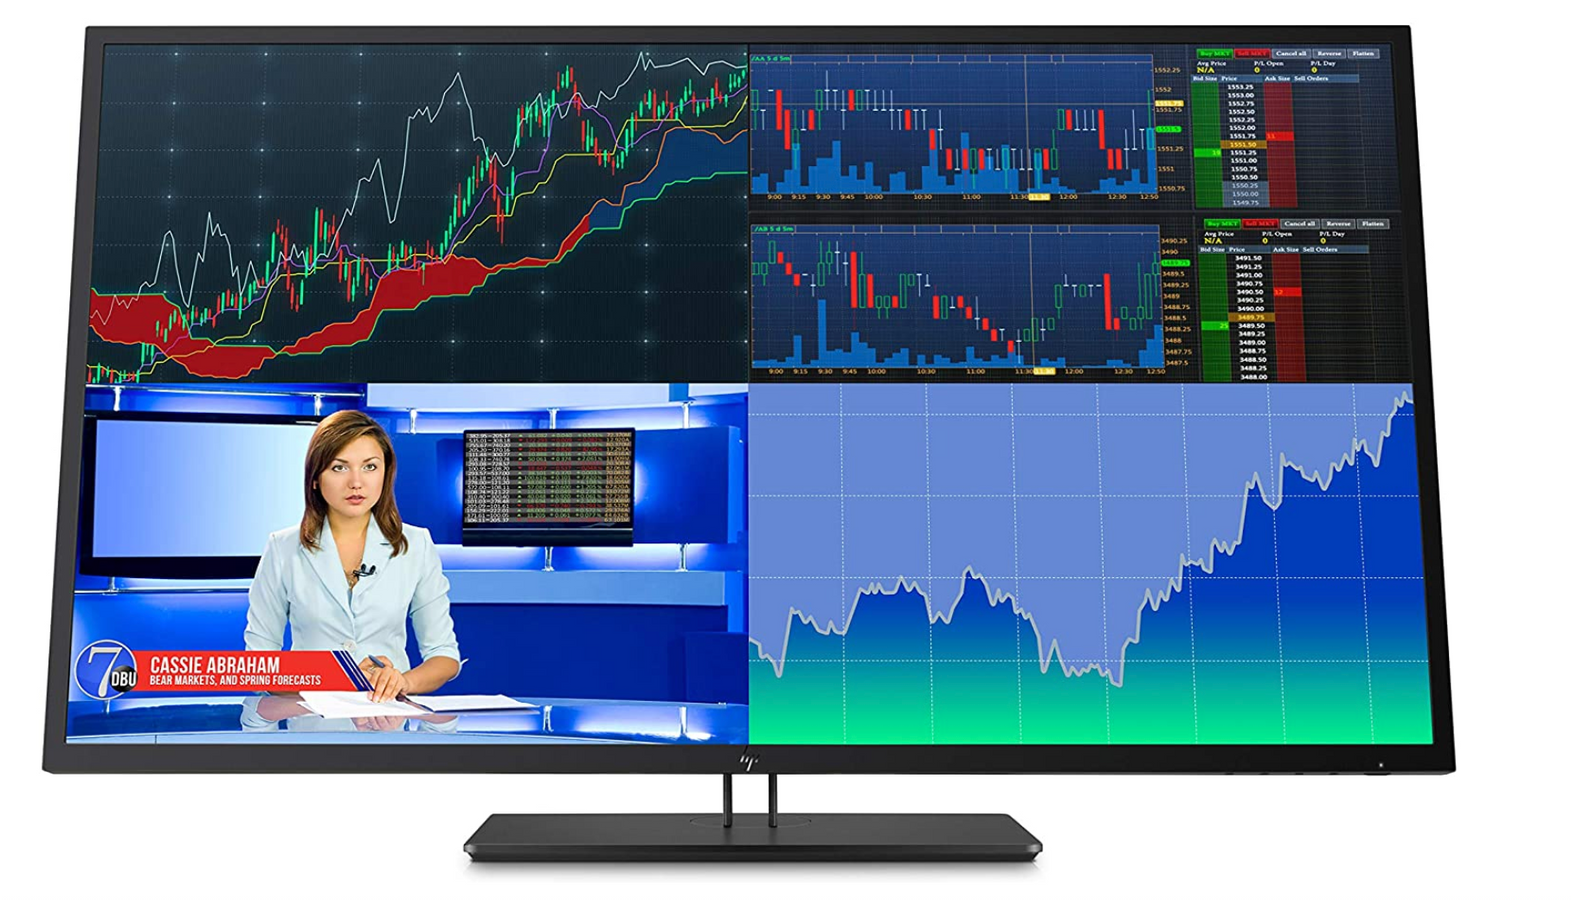 HP Z43 product image of a wide black monitor with three graphs and the news on the display.